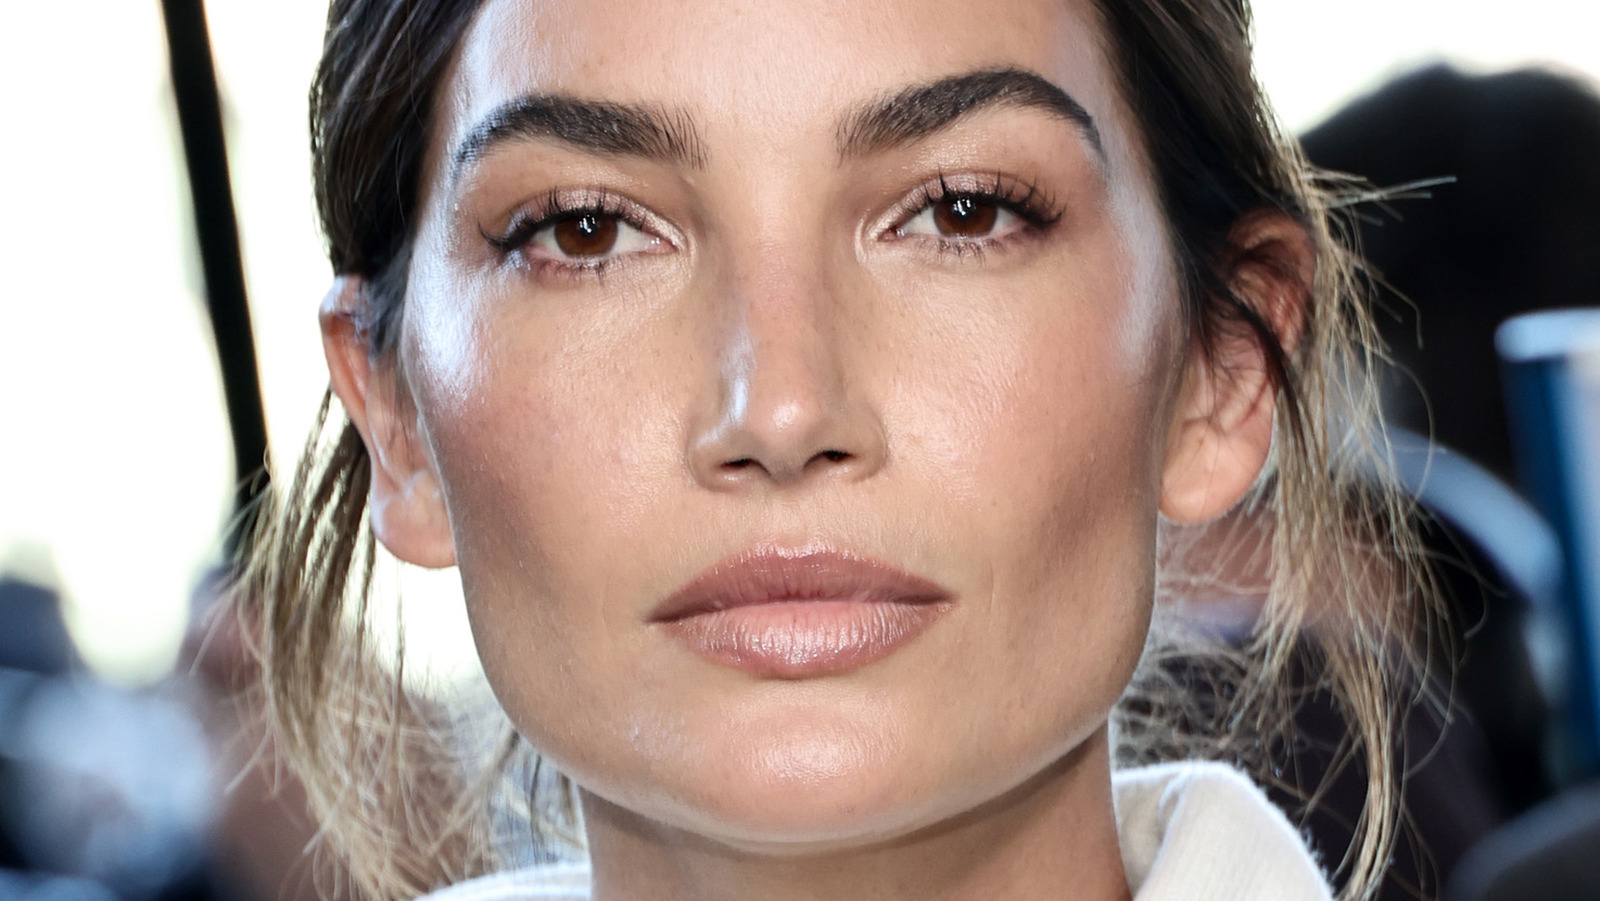 Lily Aldridge is the New Face of Proactiv